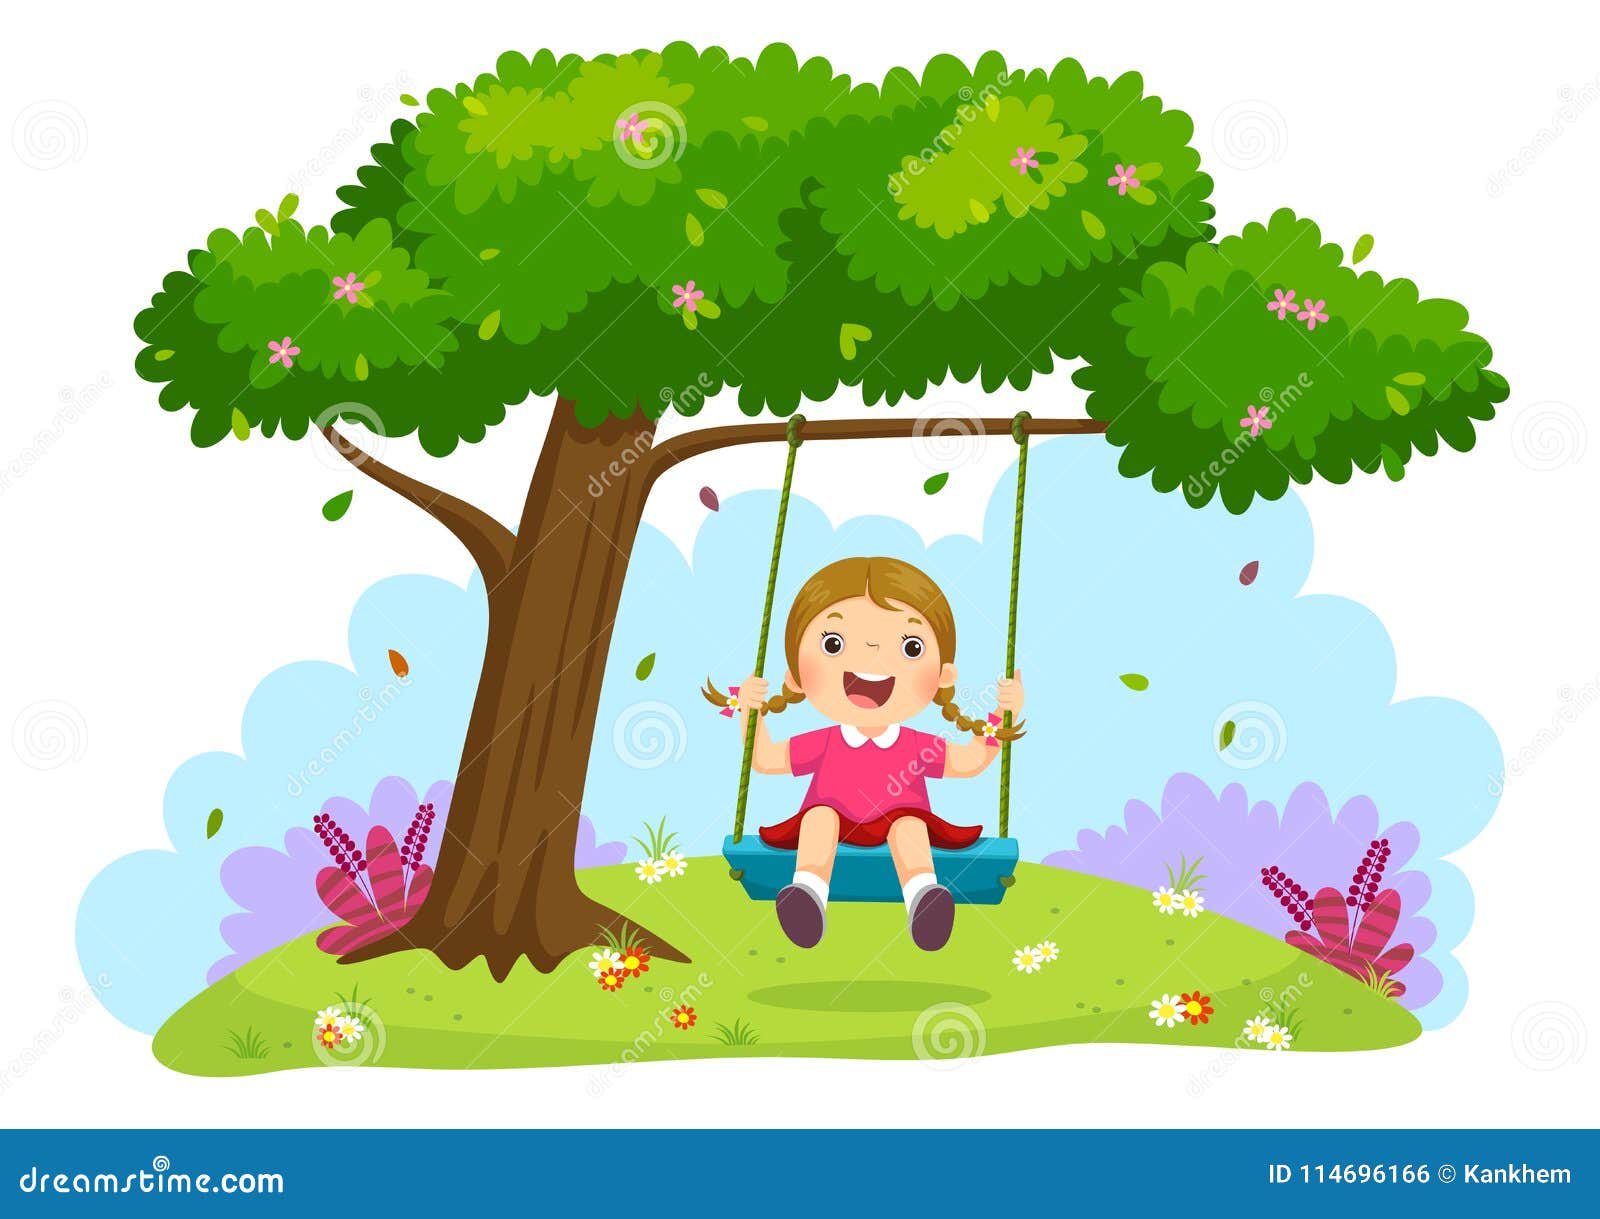 happy child girl laughing and swinging on a swing under the tree